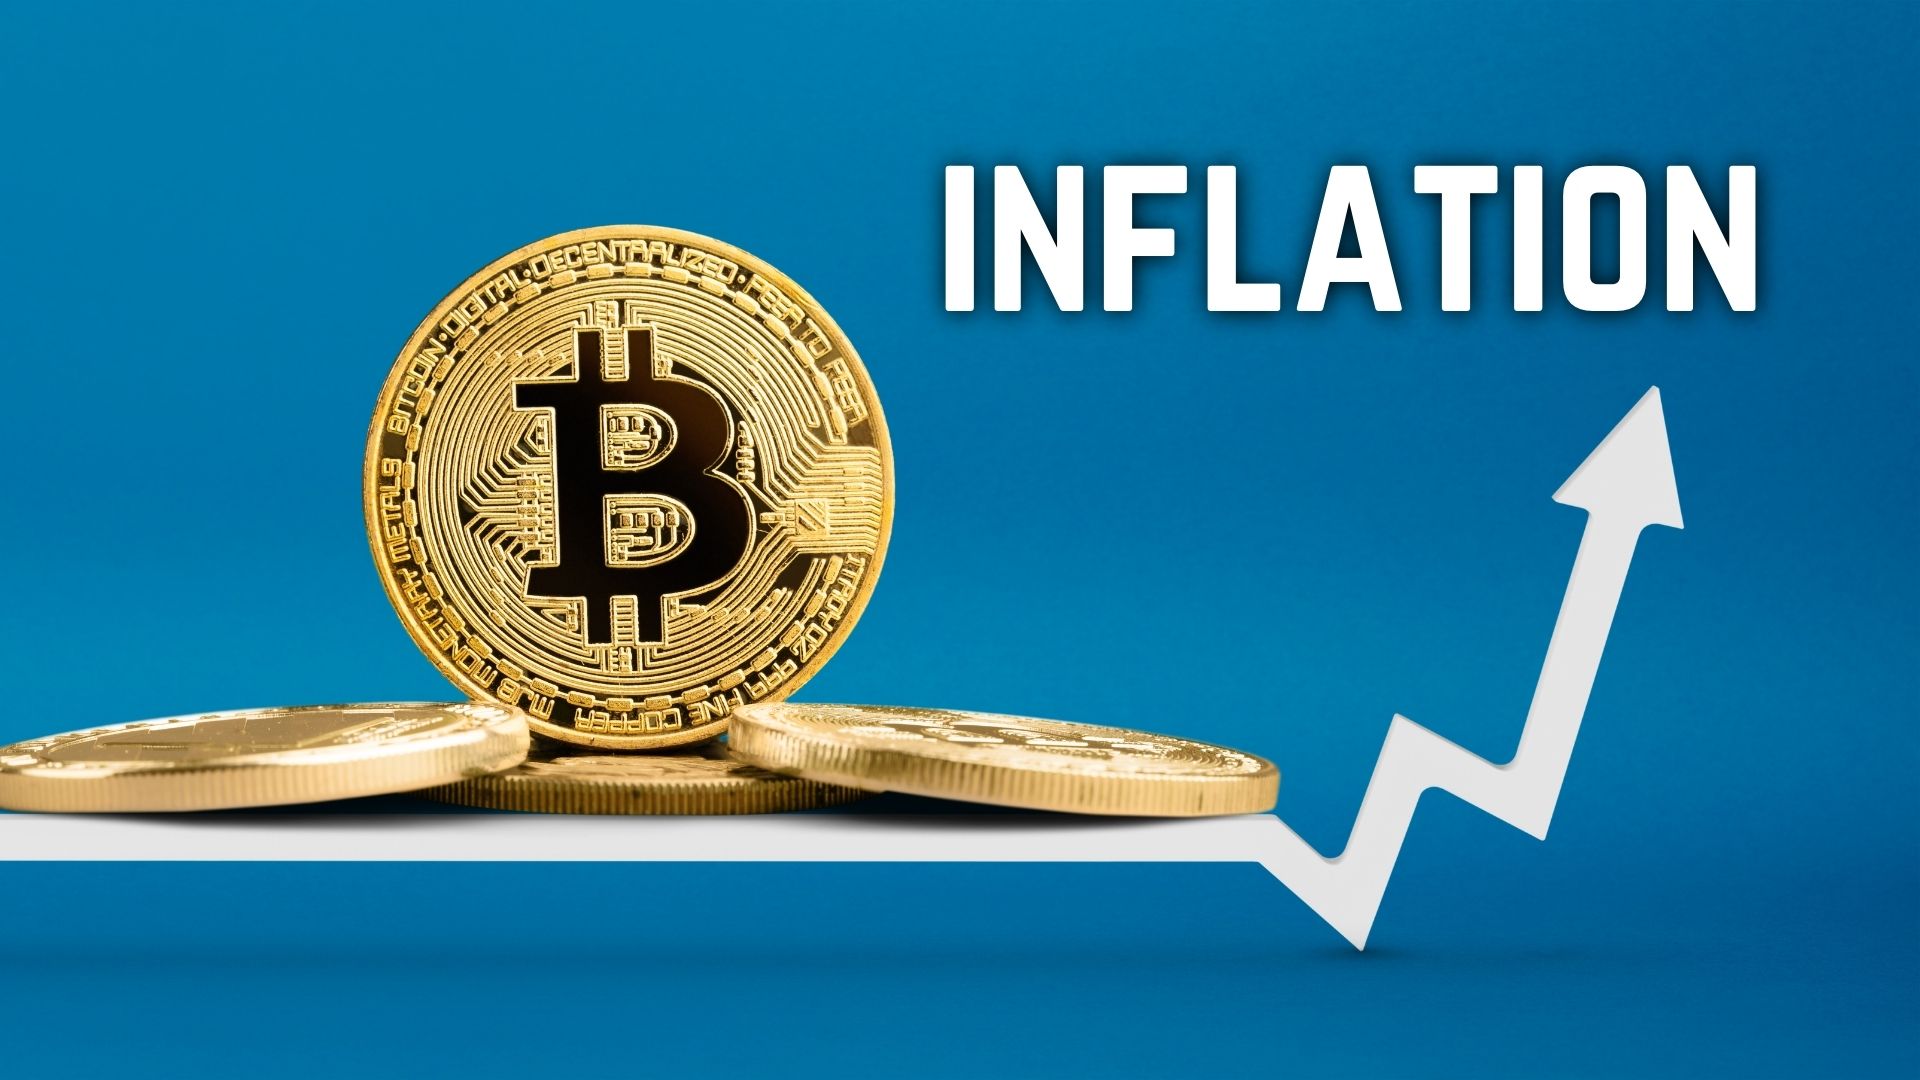 Inflation: Impact on the Crypto - Everything You Need to Know